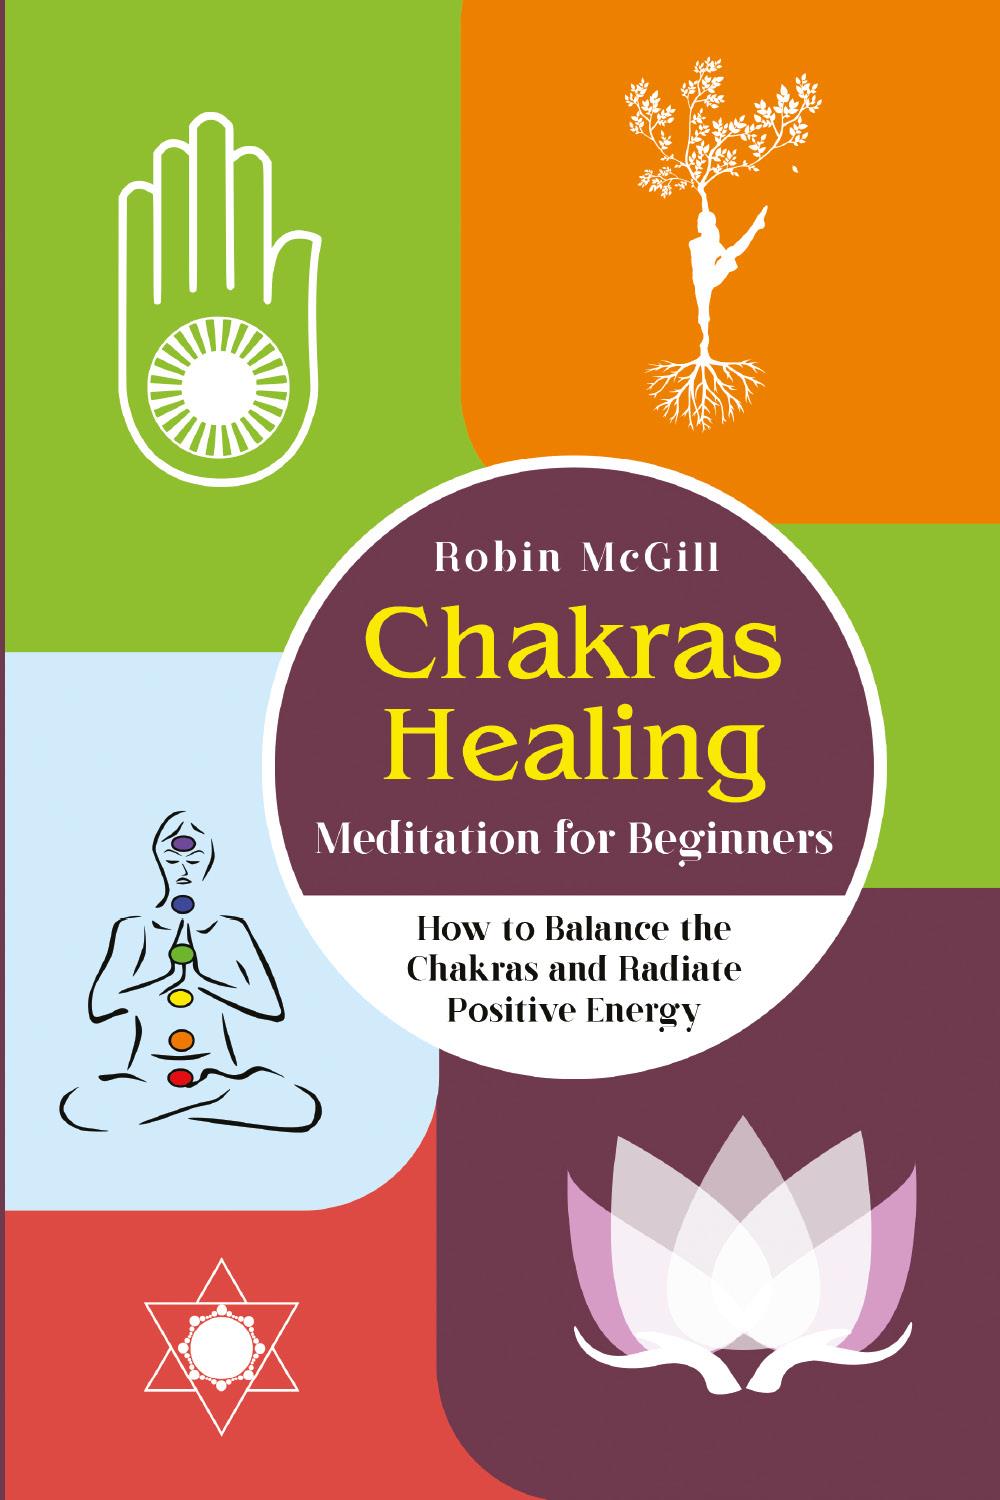 Chakras Healing Meditation for Beginners. How to Balance the Chakras and Radiate Positive Energy